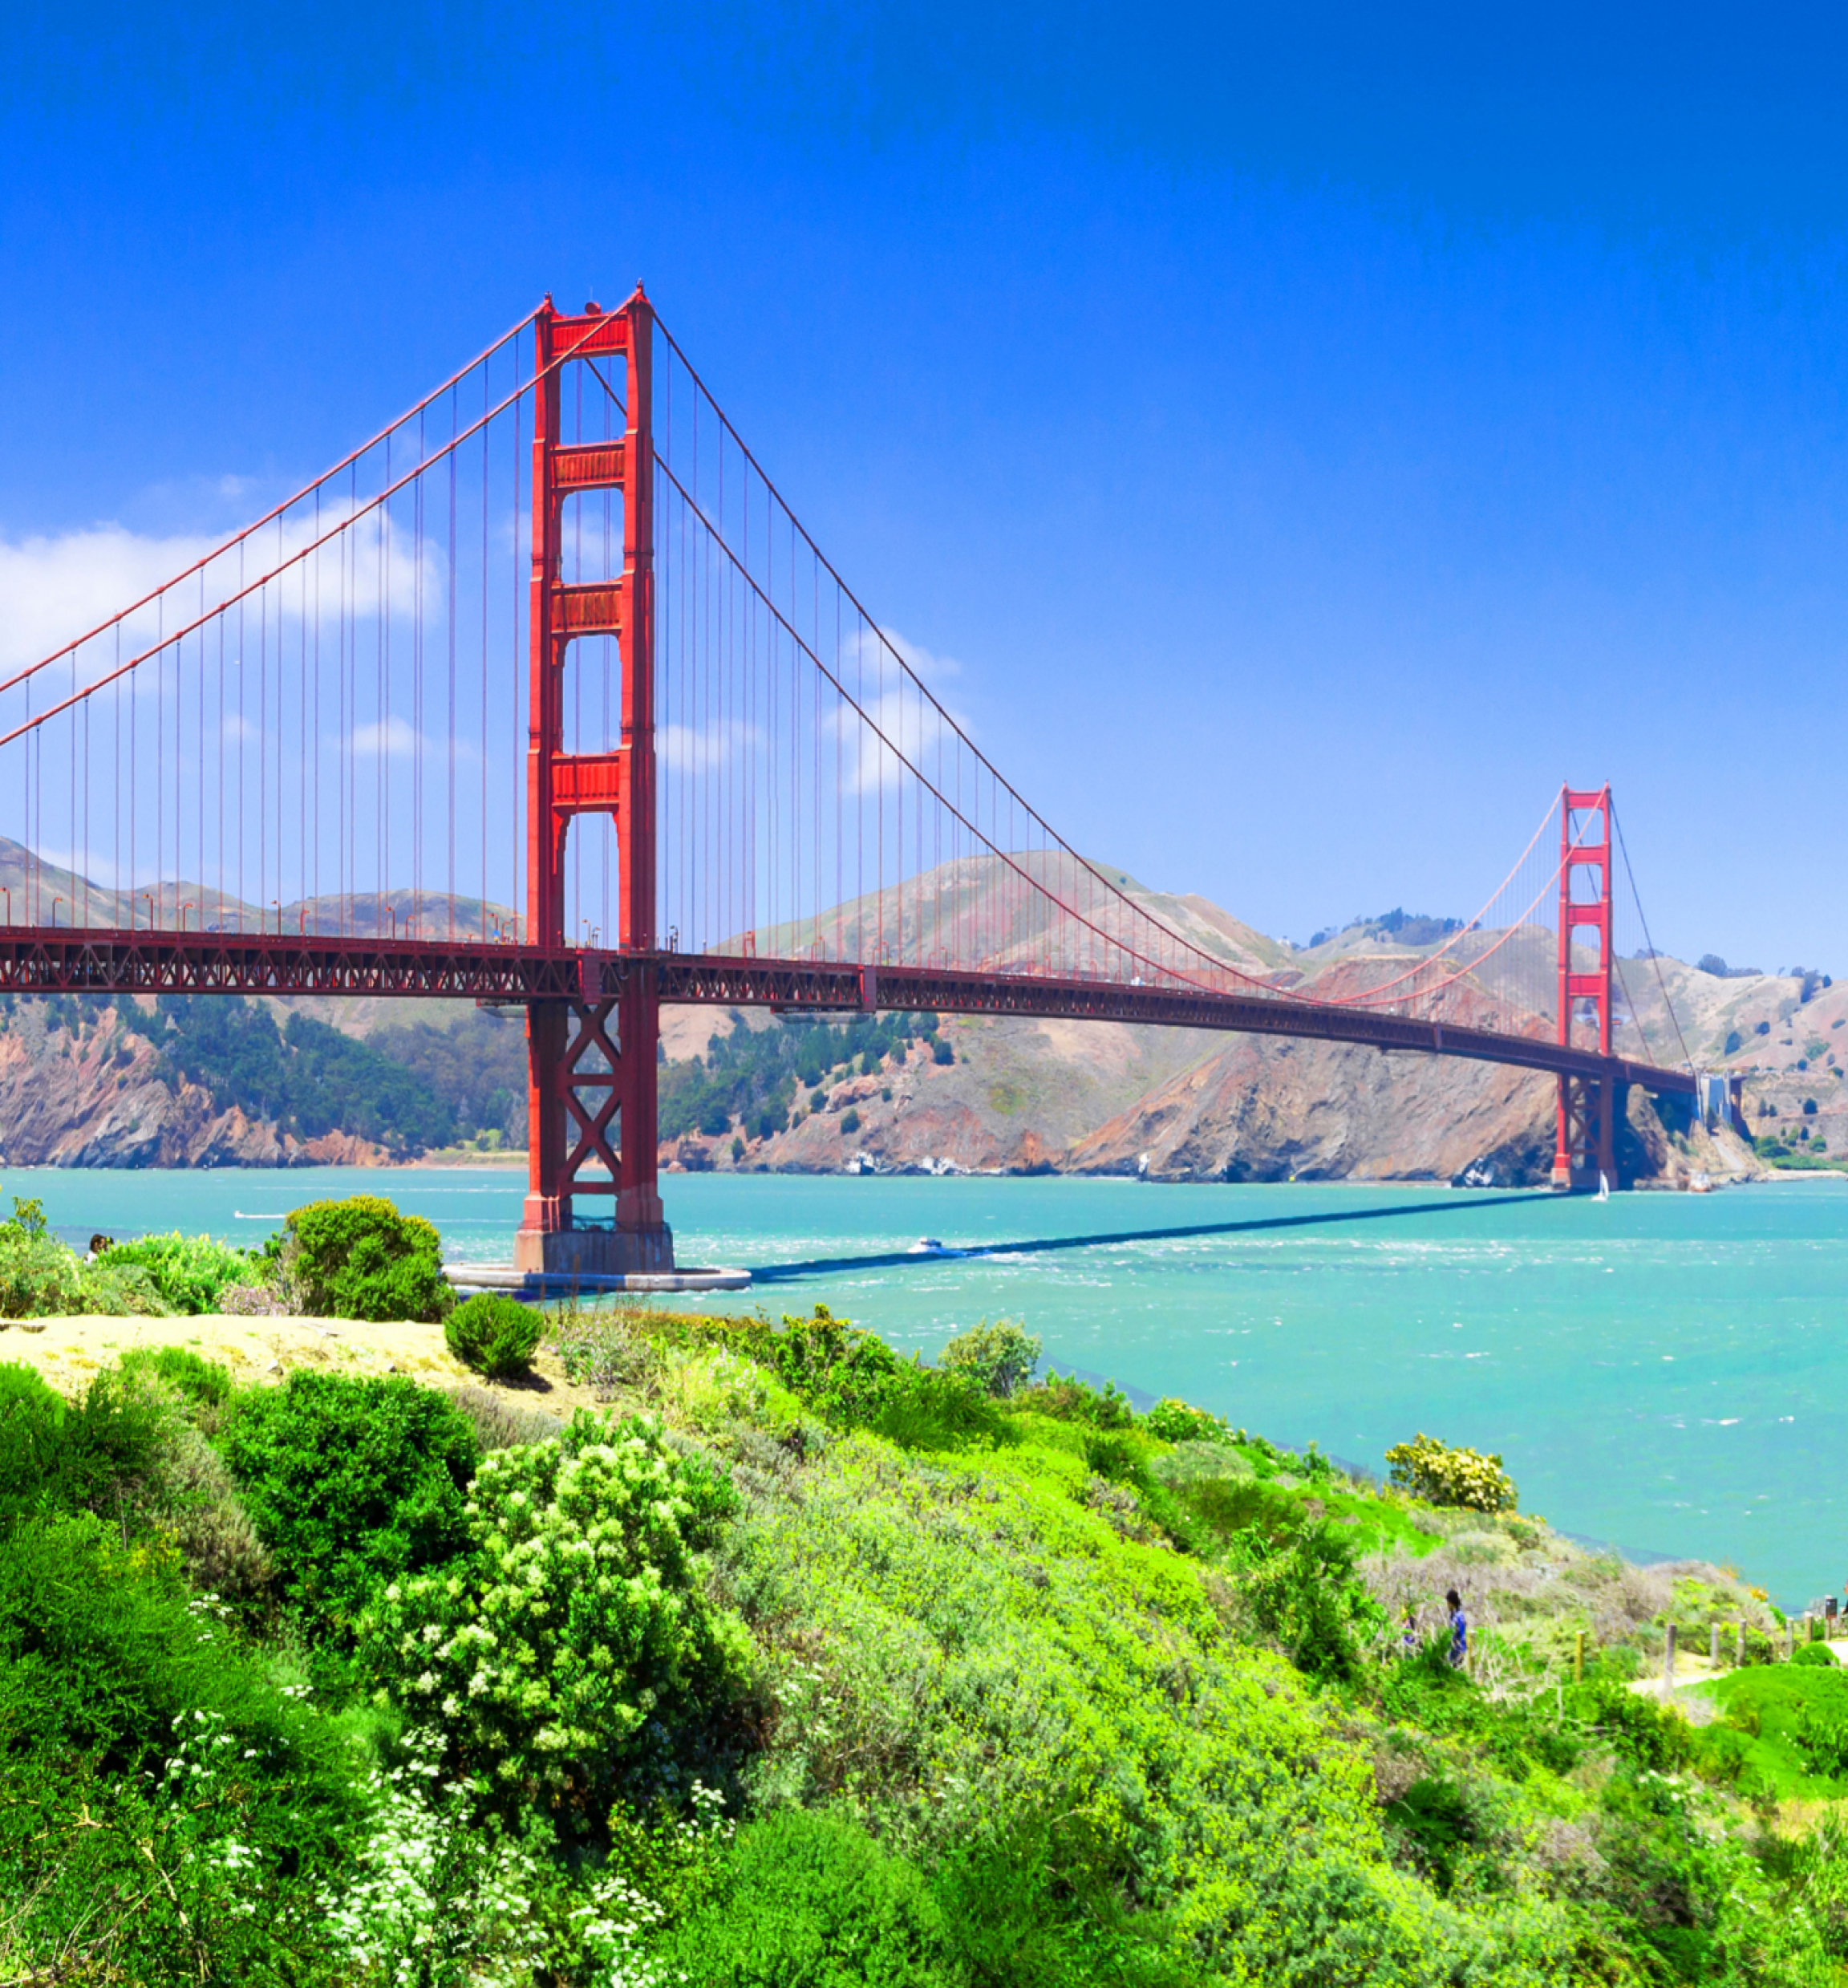 Golden Gate Bridge photo with green vegetation and blue water with an inset video of 3D scenes of downtown San Francisco